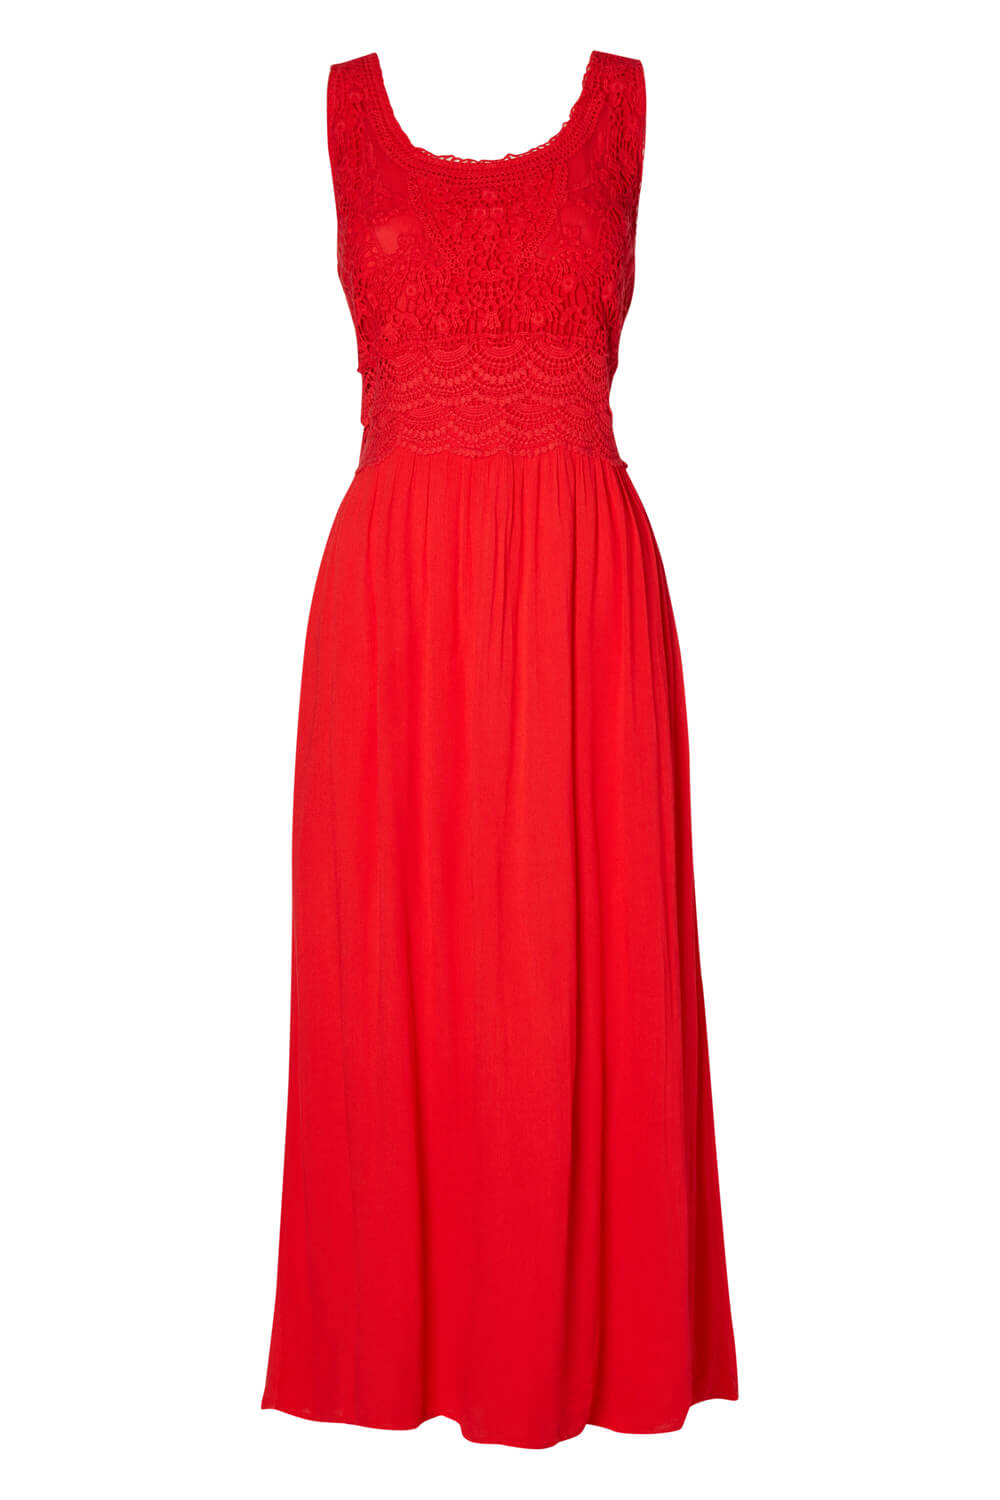 Red Cotton Embroidered Maxi Dress, Image 3 of 3